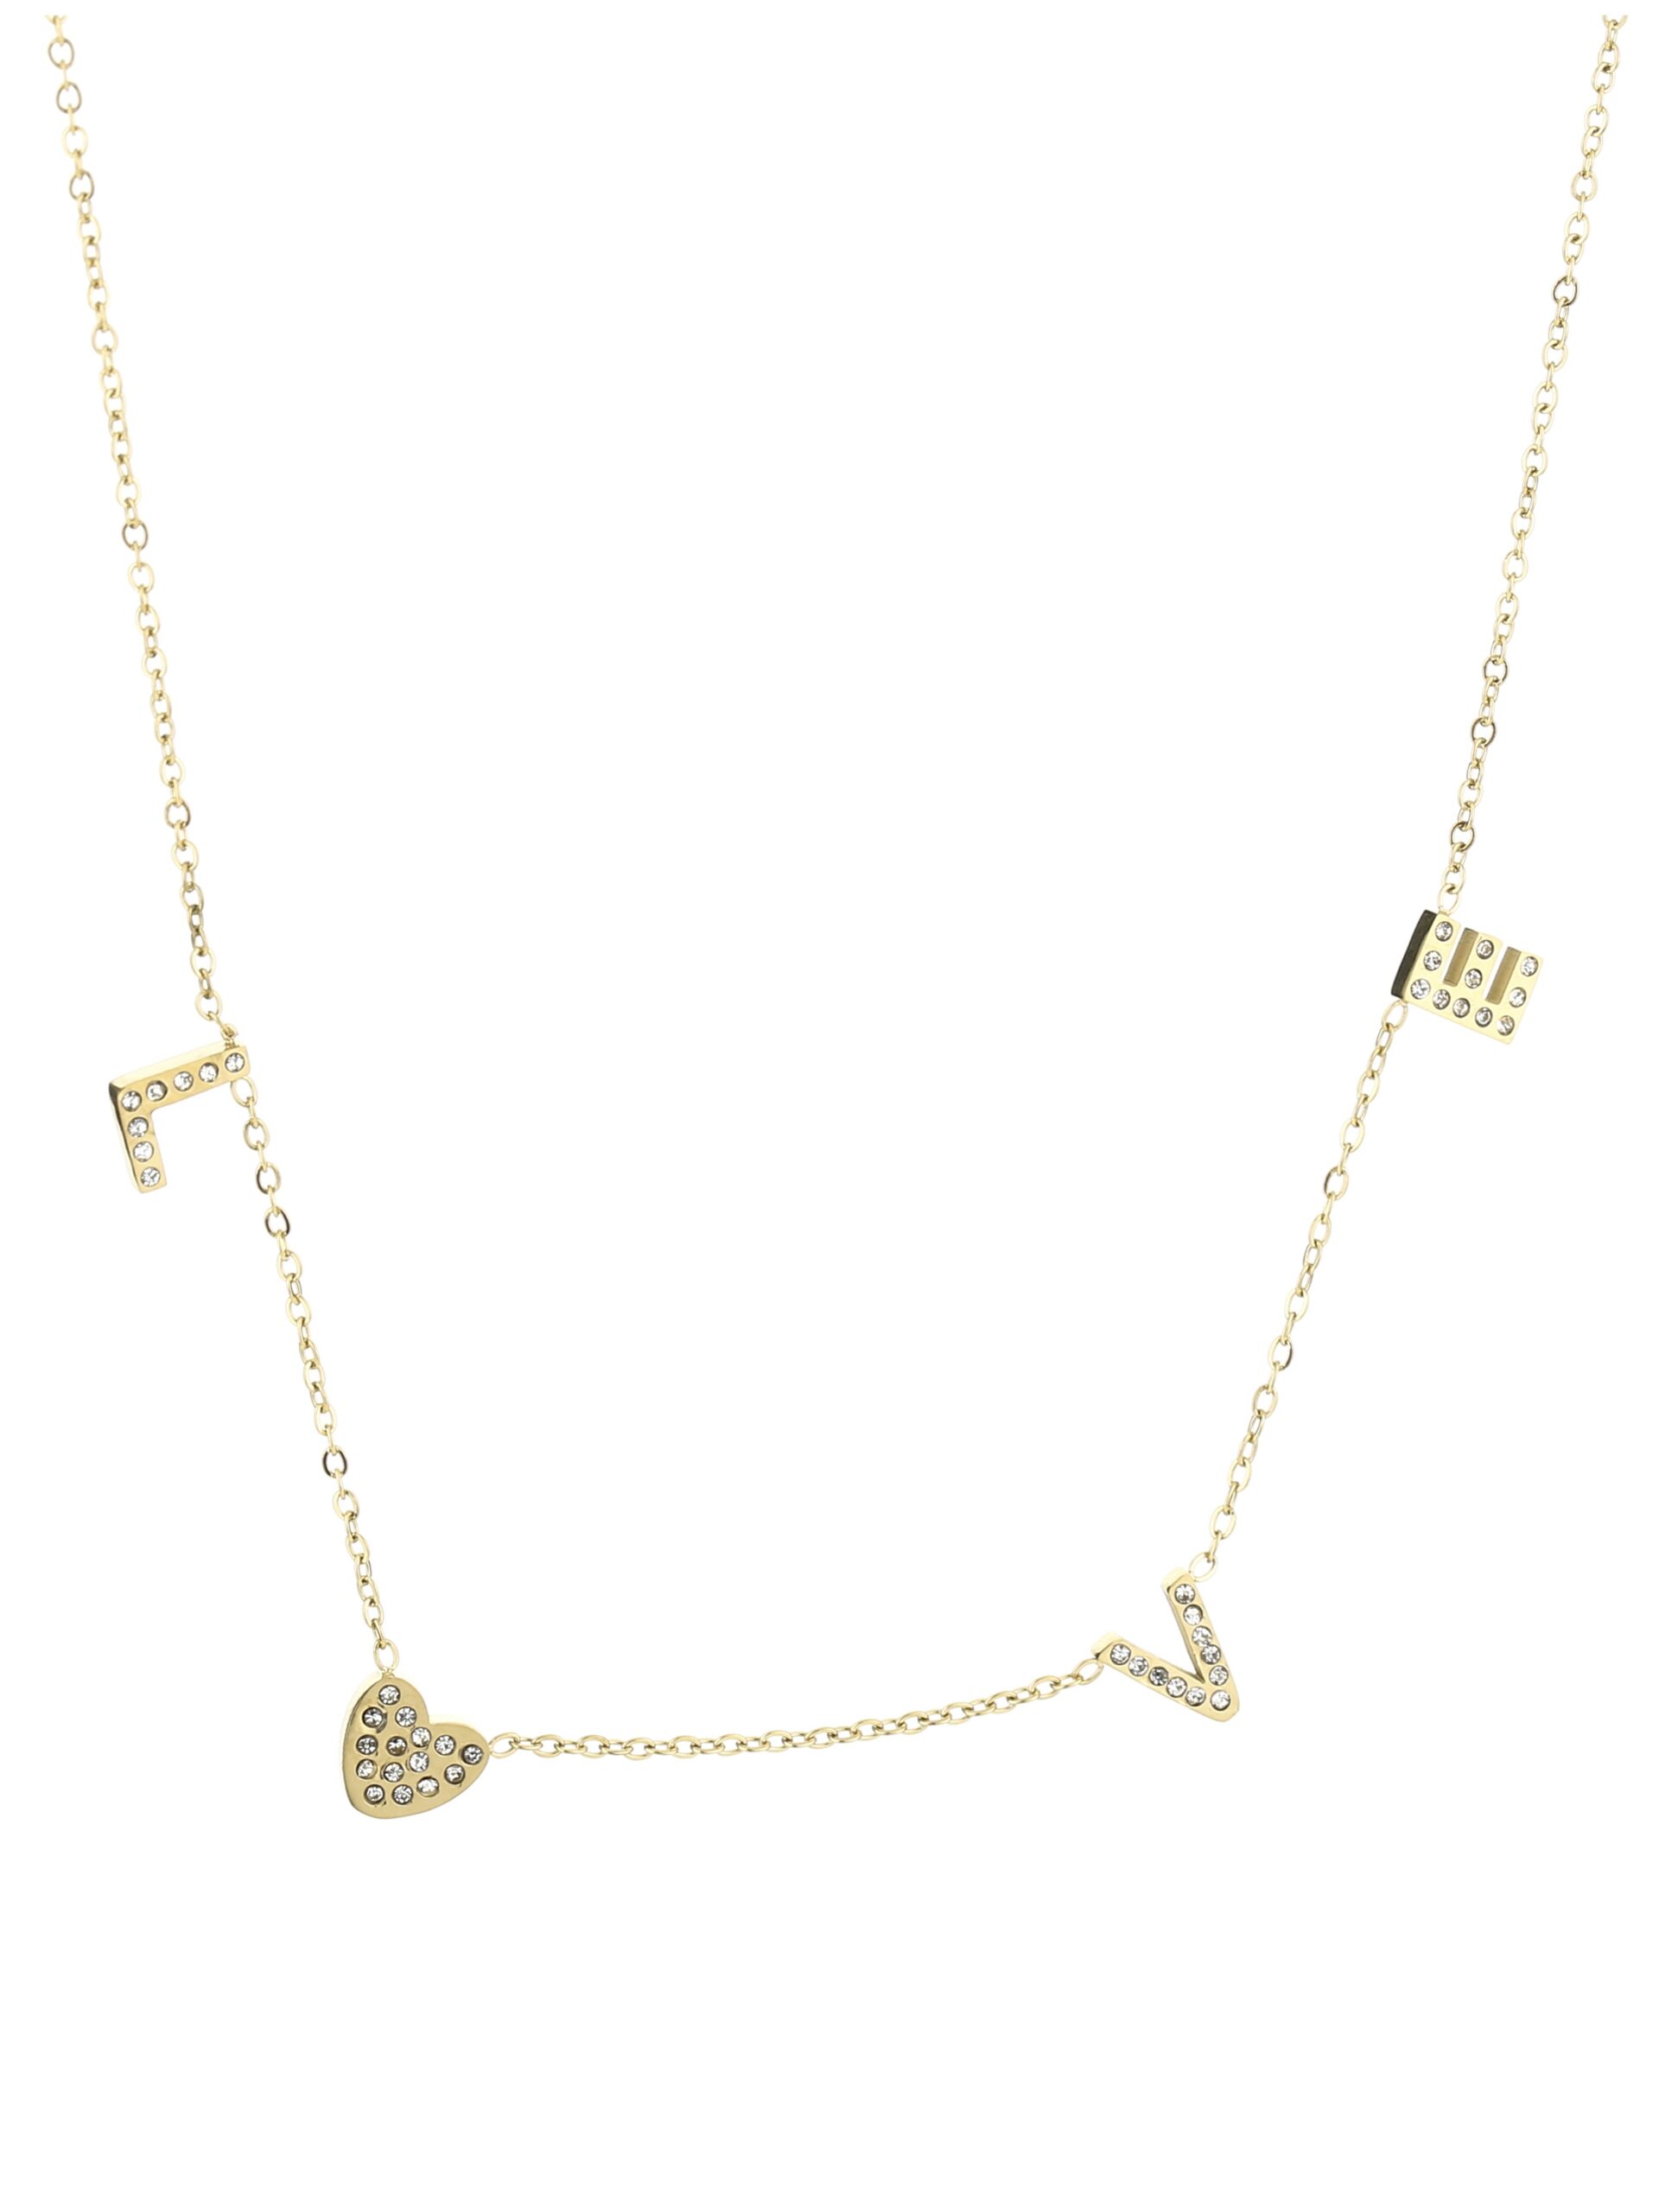 MB – Ketting LOVE Strass – Goud